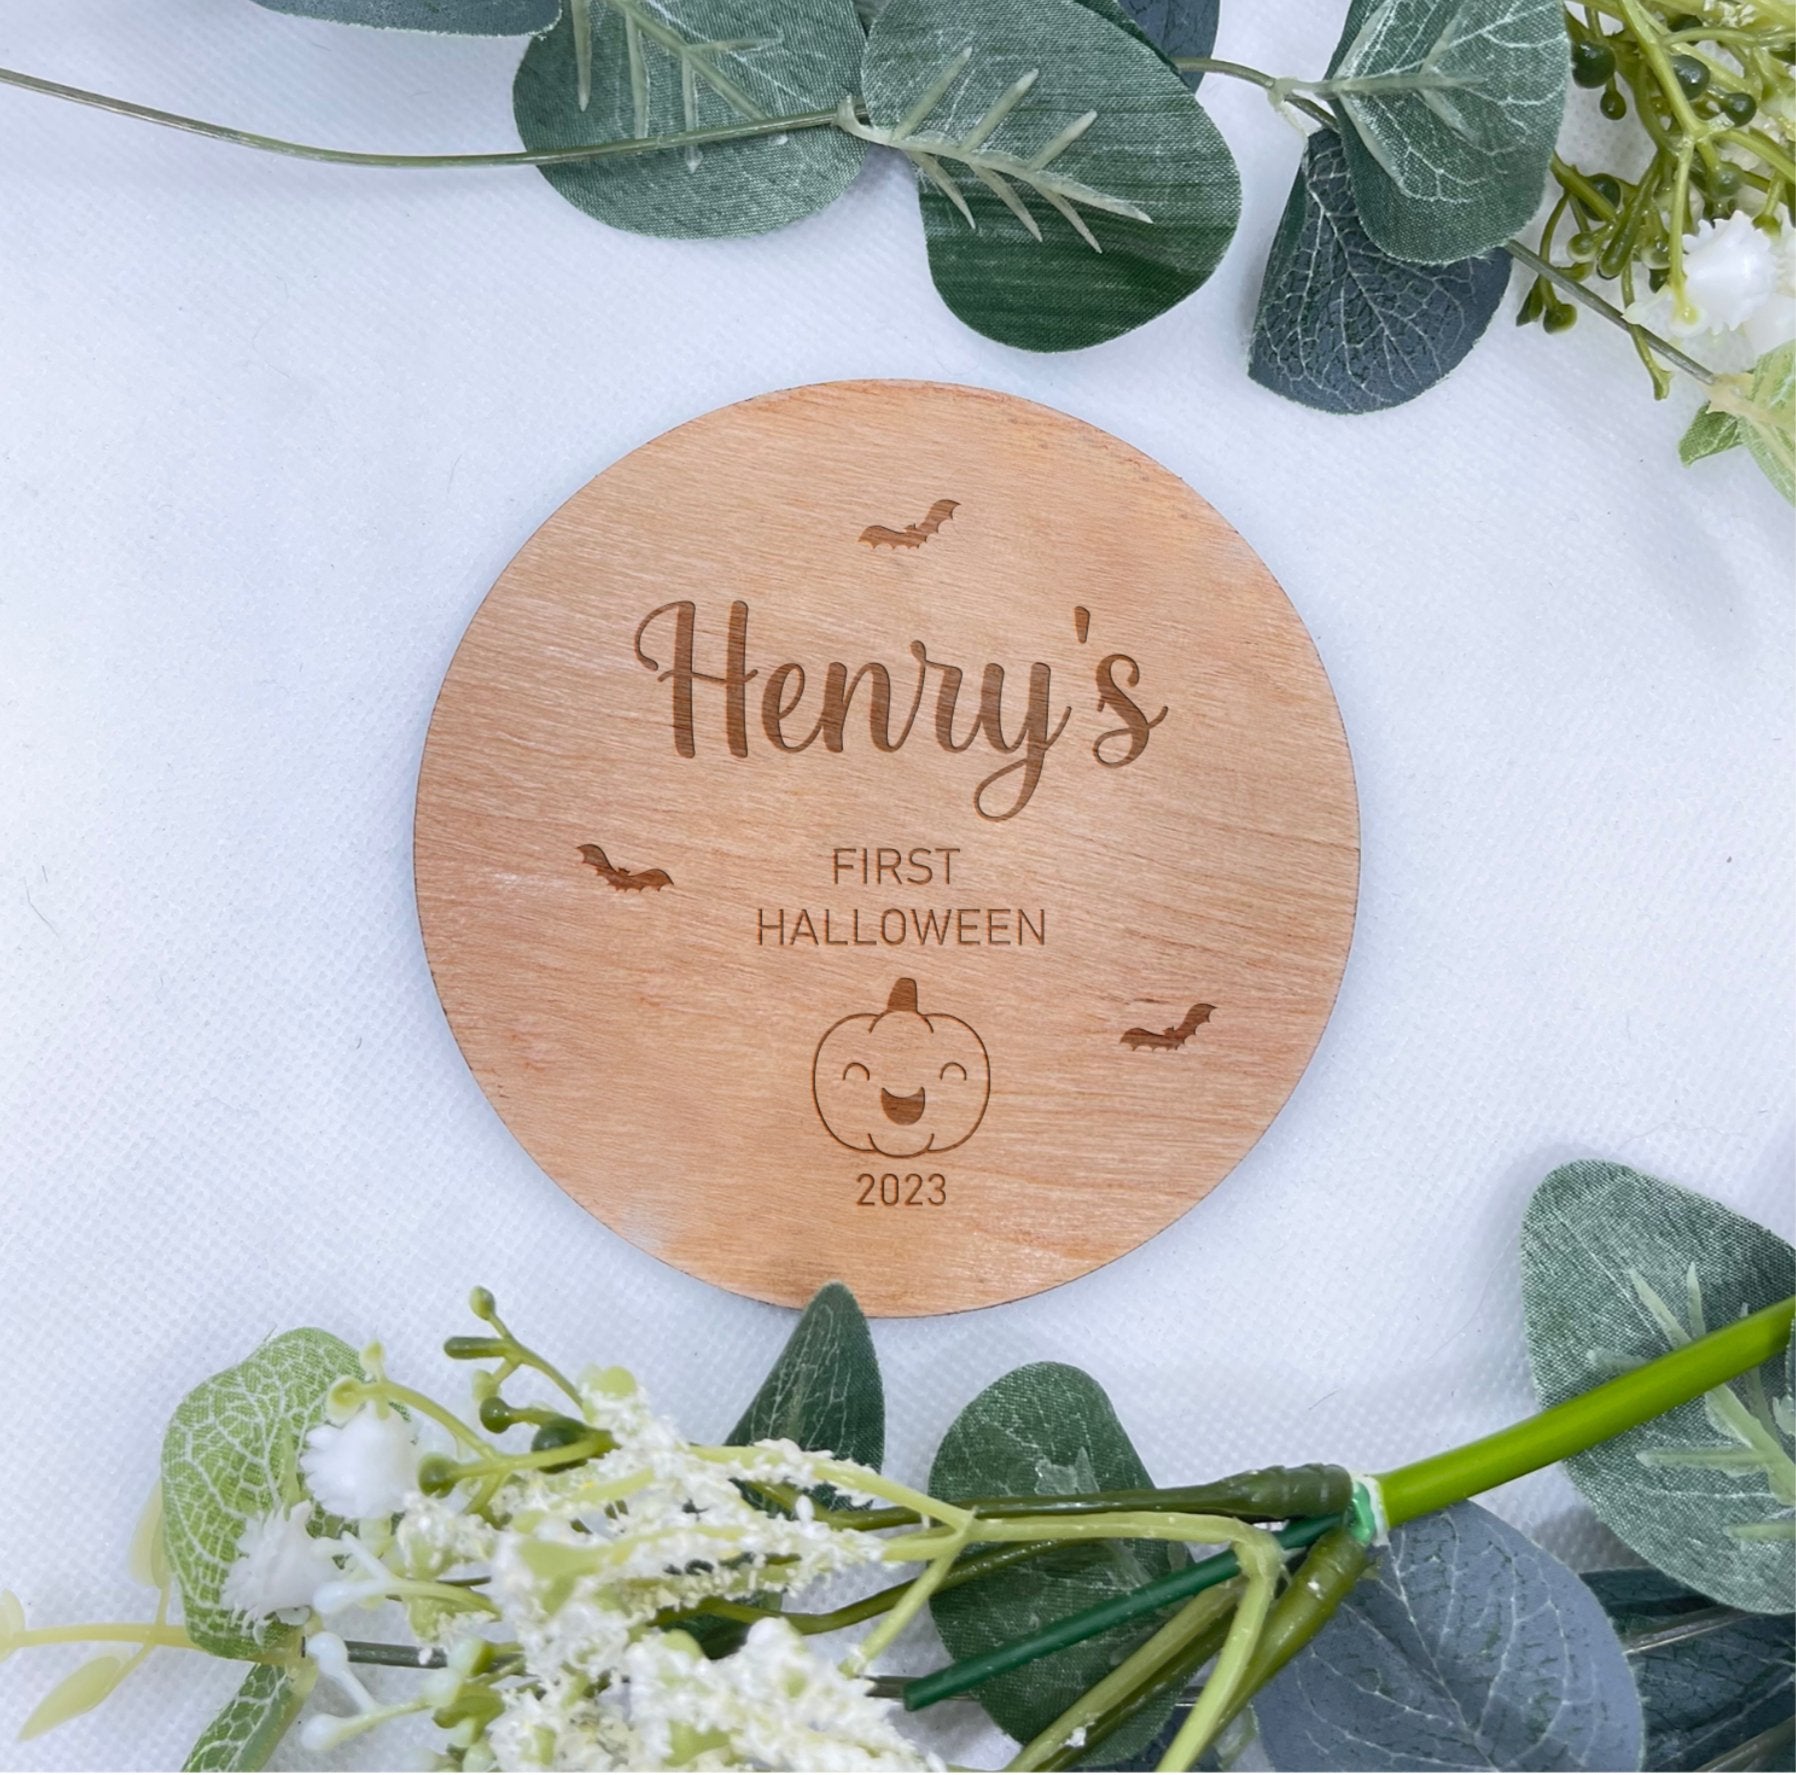  Baby's First Halloween Plaque - Custom engraved cherry wood keepsake featuring a pumpkin and bats design. Capture the magic of your little one's first Halloween with this charming memento. Ideal Halloween decoration and gift photo prop. 